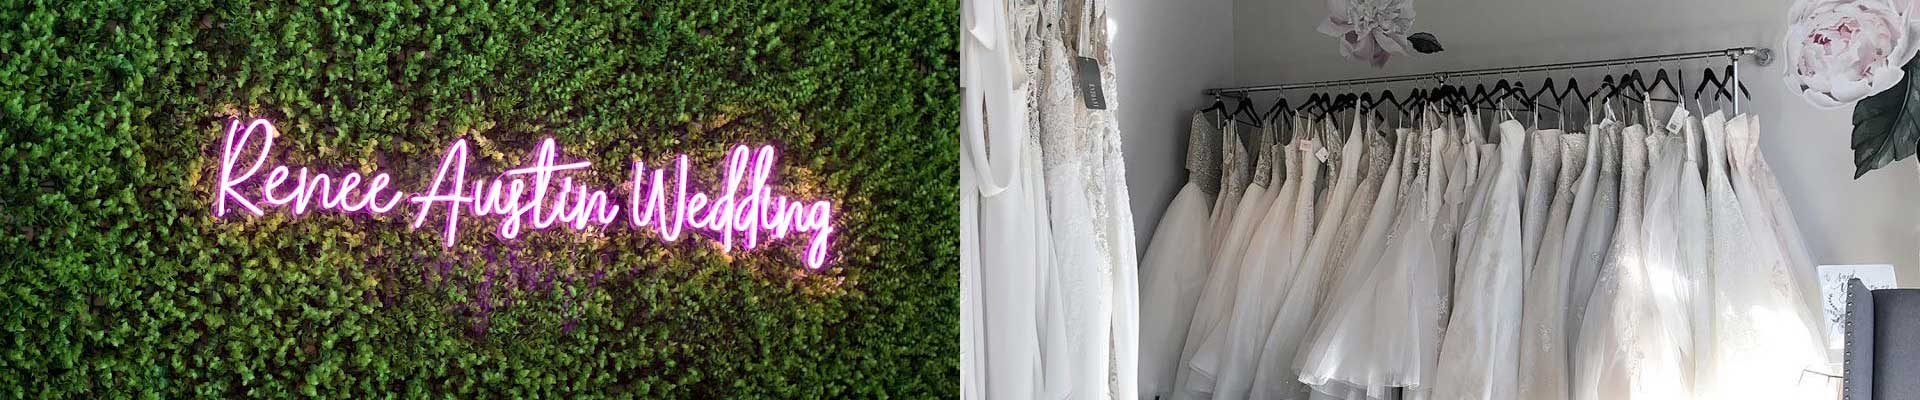 Picture of Renee Austin Wedding led sign and a rack of wedding dresses